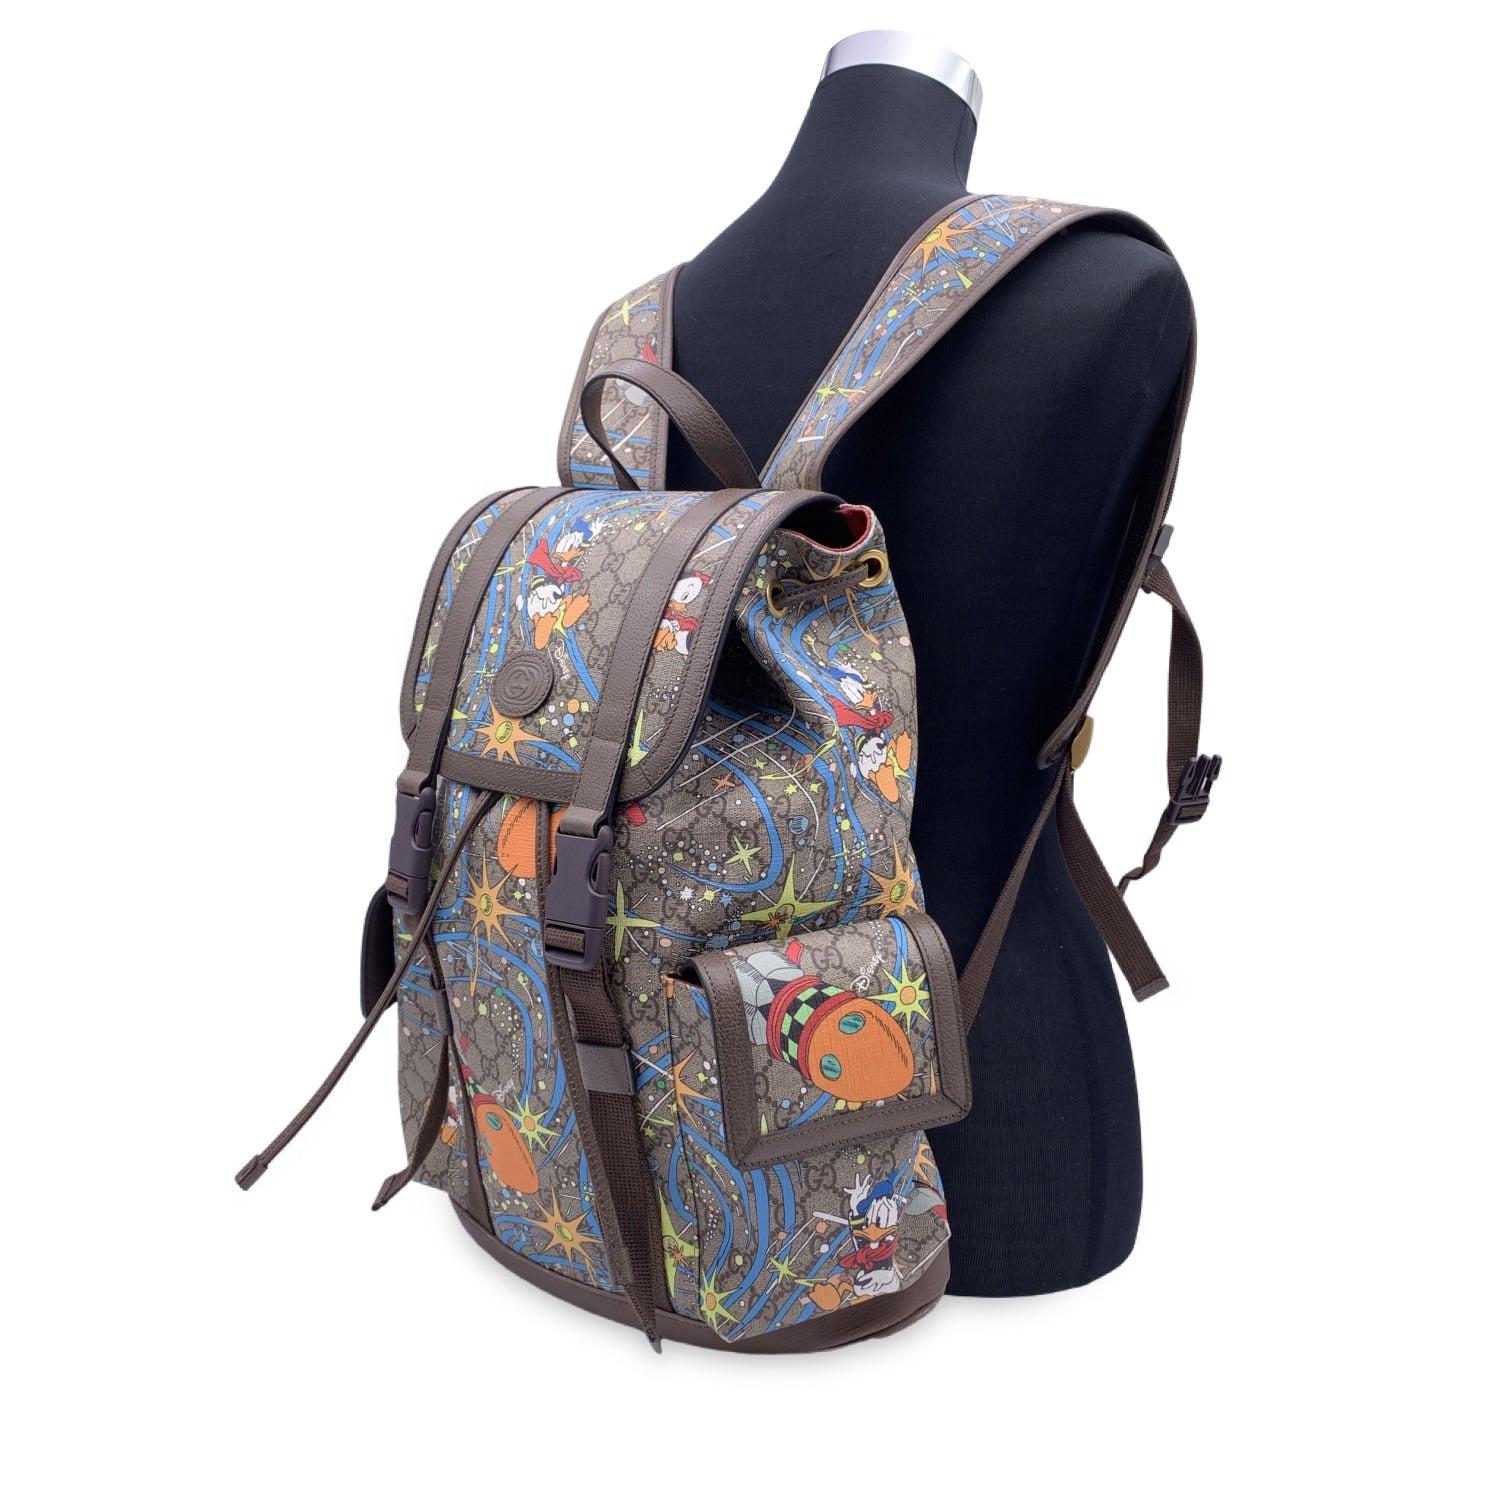 GUCCI x Disney GG Monogram canvas Donald Duck Backpack. It is crafted in GG supreme monogram canvas with multicolor Donald Duck and rocket print and brown leather trim. The bag has a flap top with double buckle, drawstring closure and 2 front flap